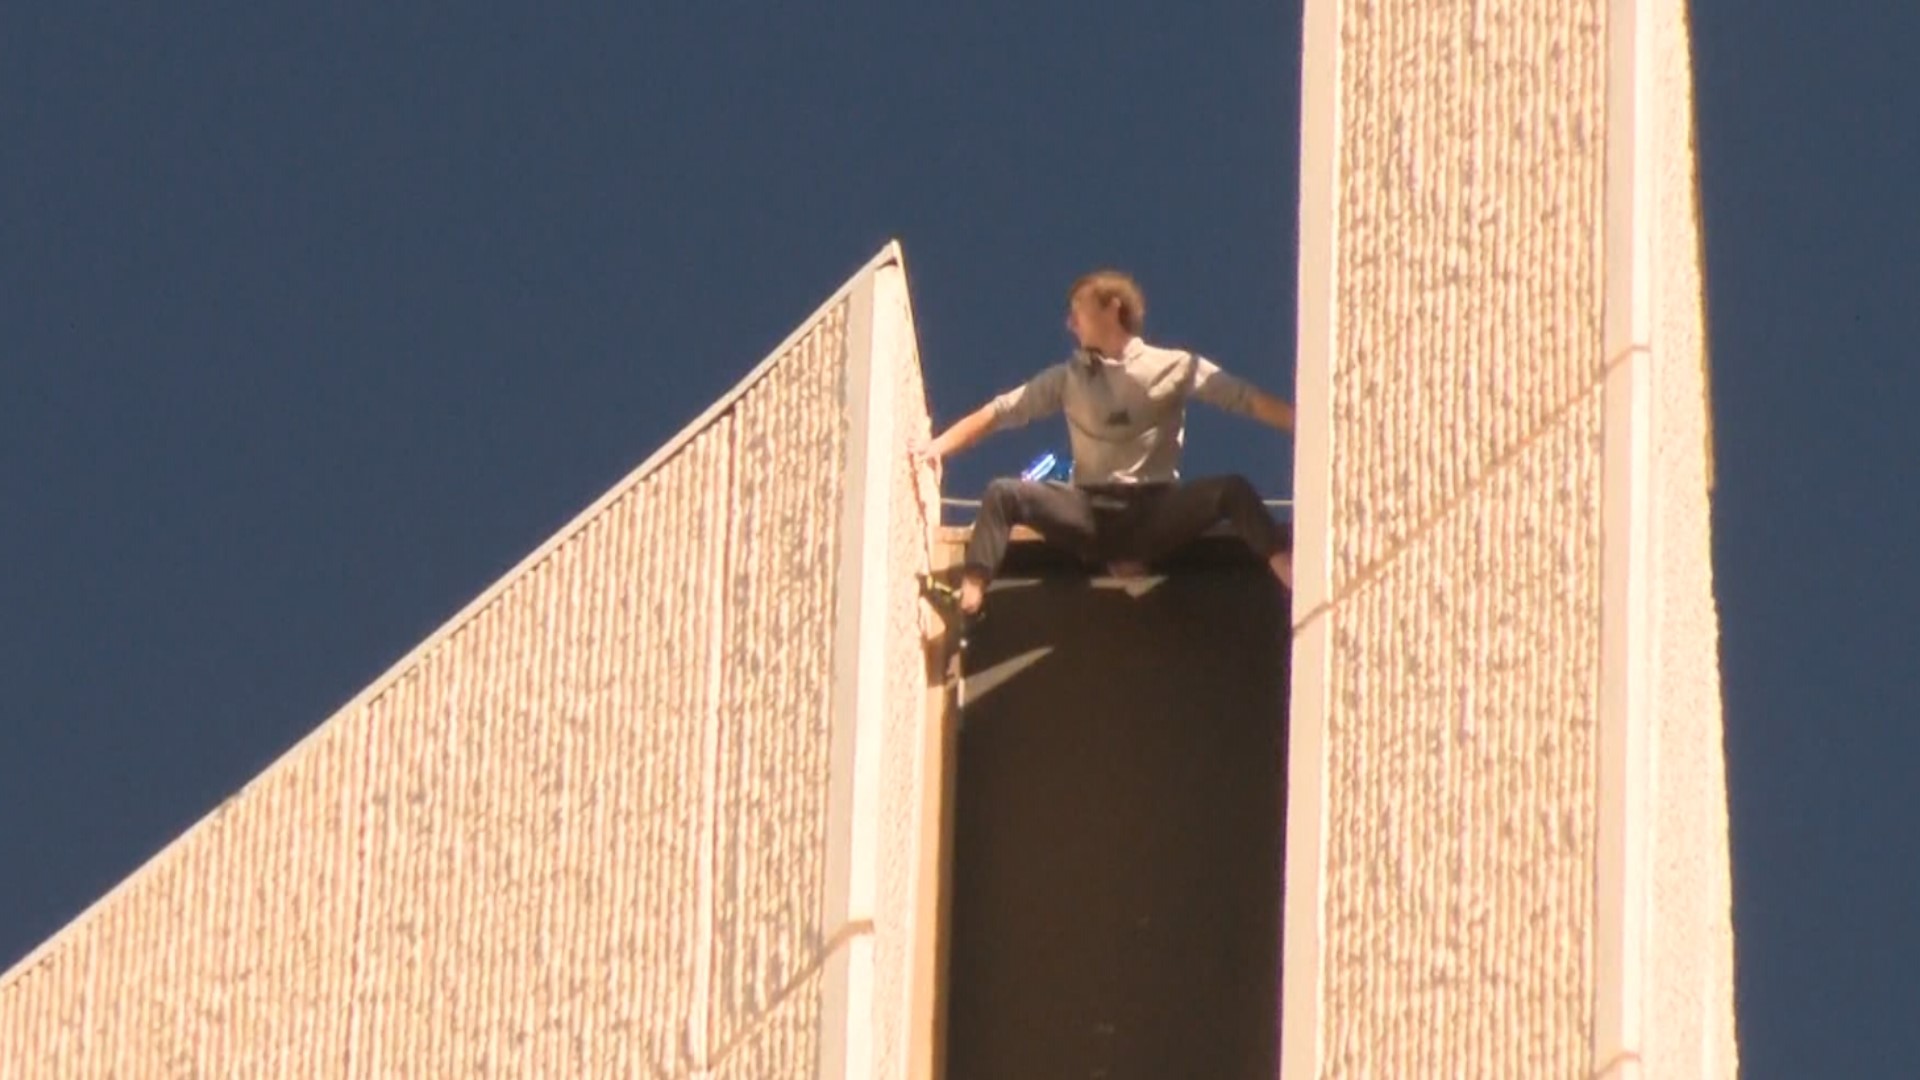 The protestor, known online as Pro-life Spiderman, was seen climbing the building early Tuesday morning.